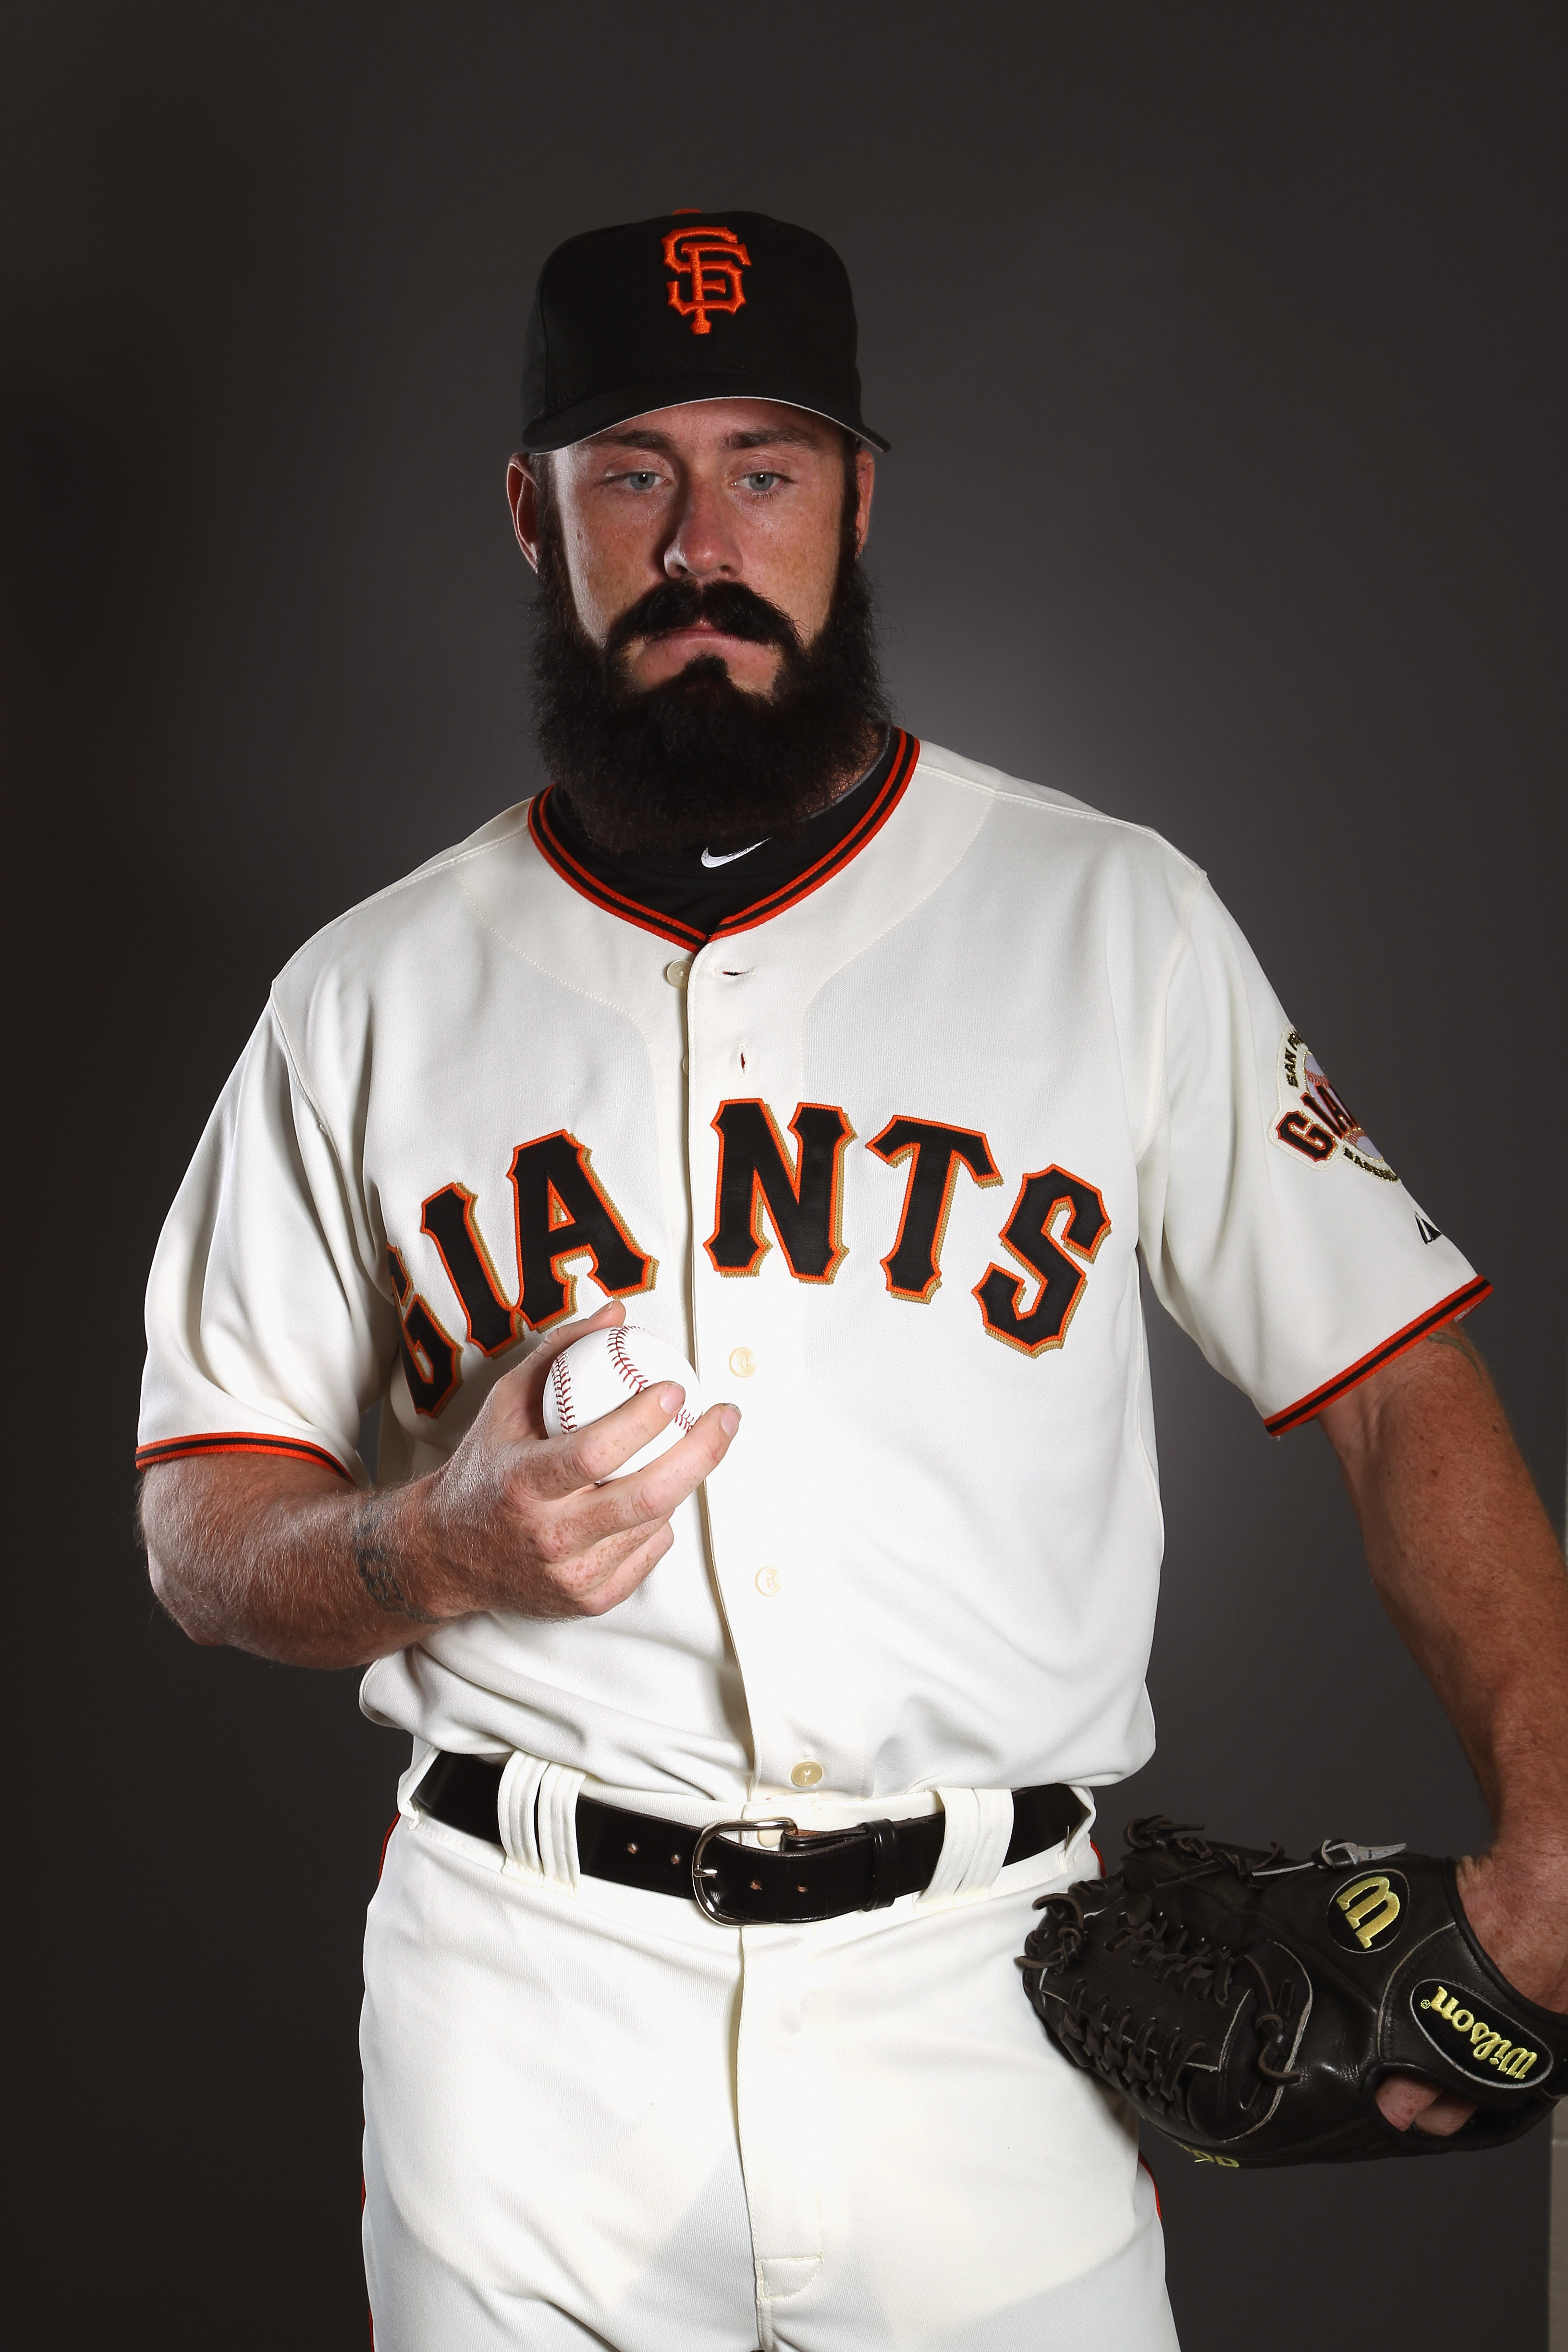 Whatever Happened to Giants Closer Brian Wilson and His Iconic Beard?